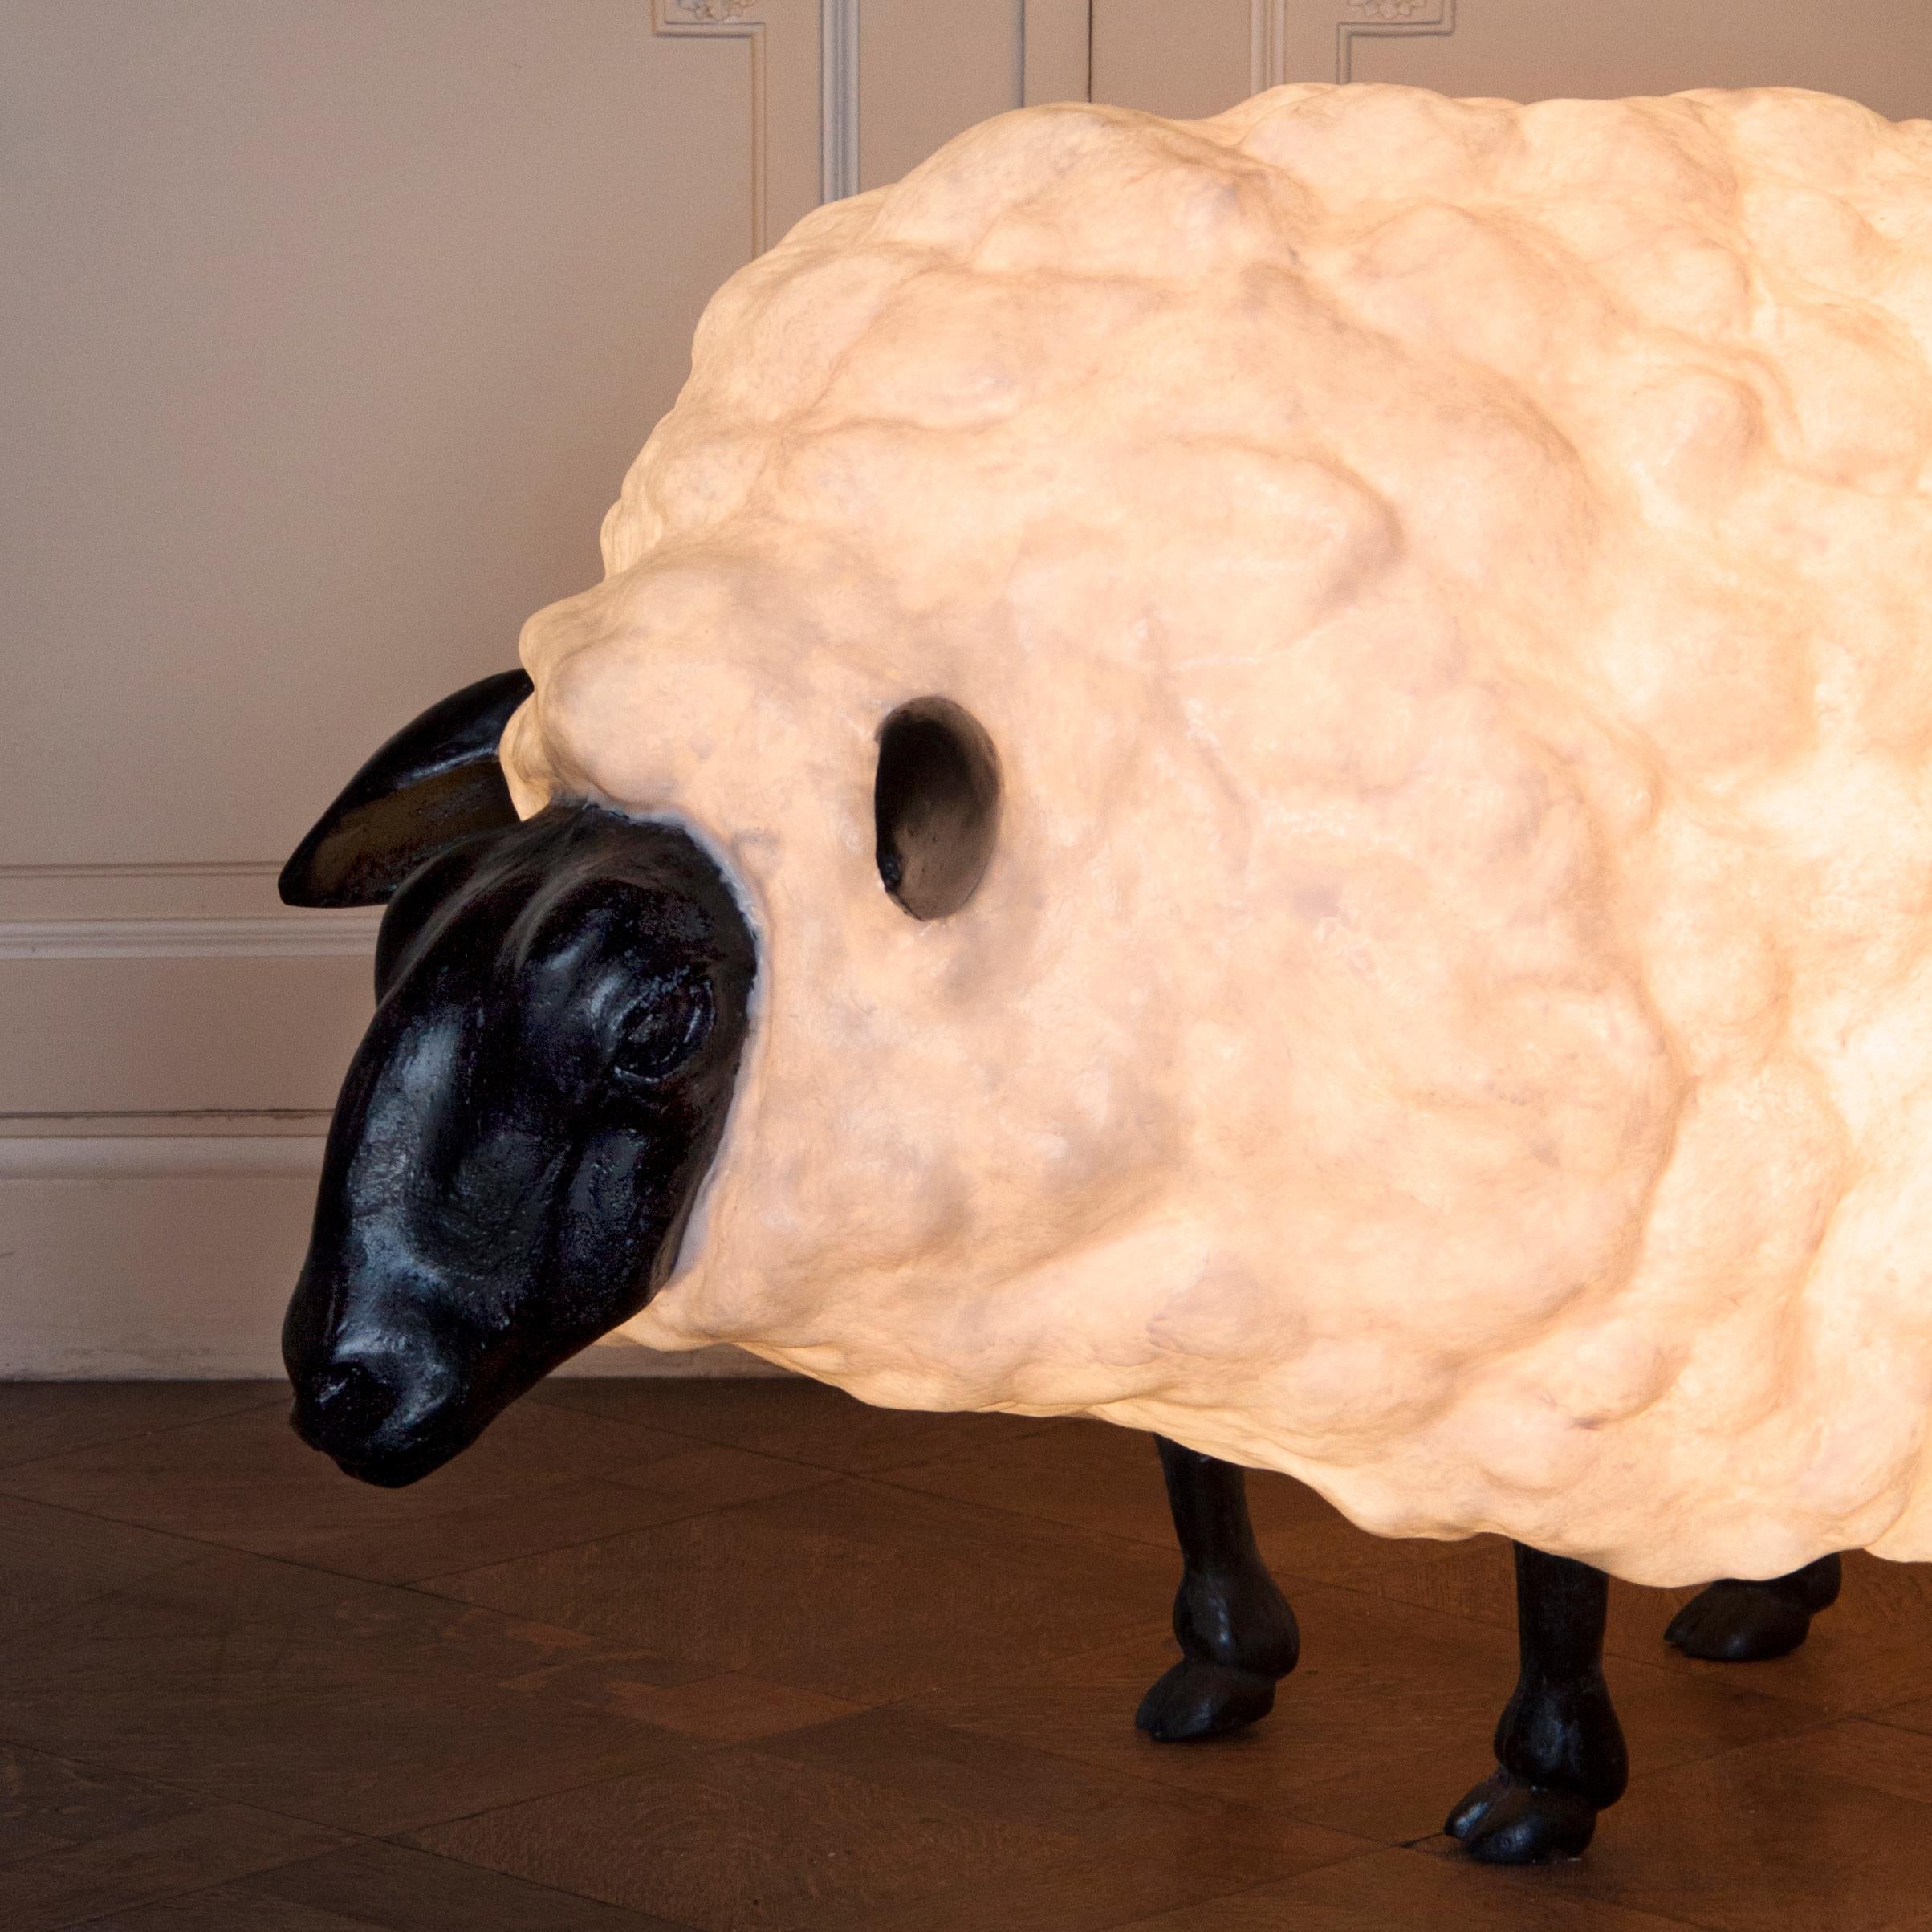 Molly light sculpture by Atelier Haute Cuisine
Dimensions: 65 x 11 x 75 cm

The cloned sheep Dolly gave us the inspiration to give the sheep cloning a go for ourselves. After the first sheep was sculpted, we cloned each body part separately so that